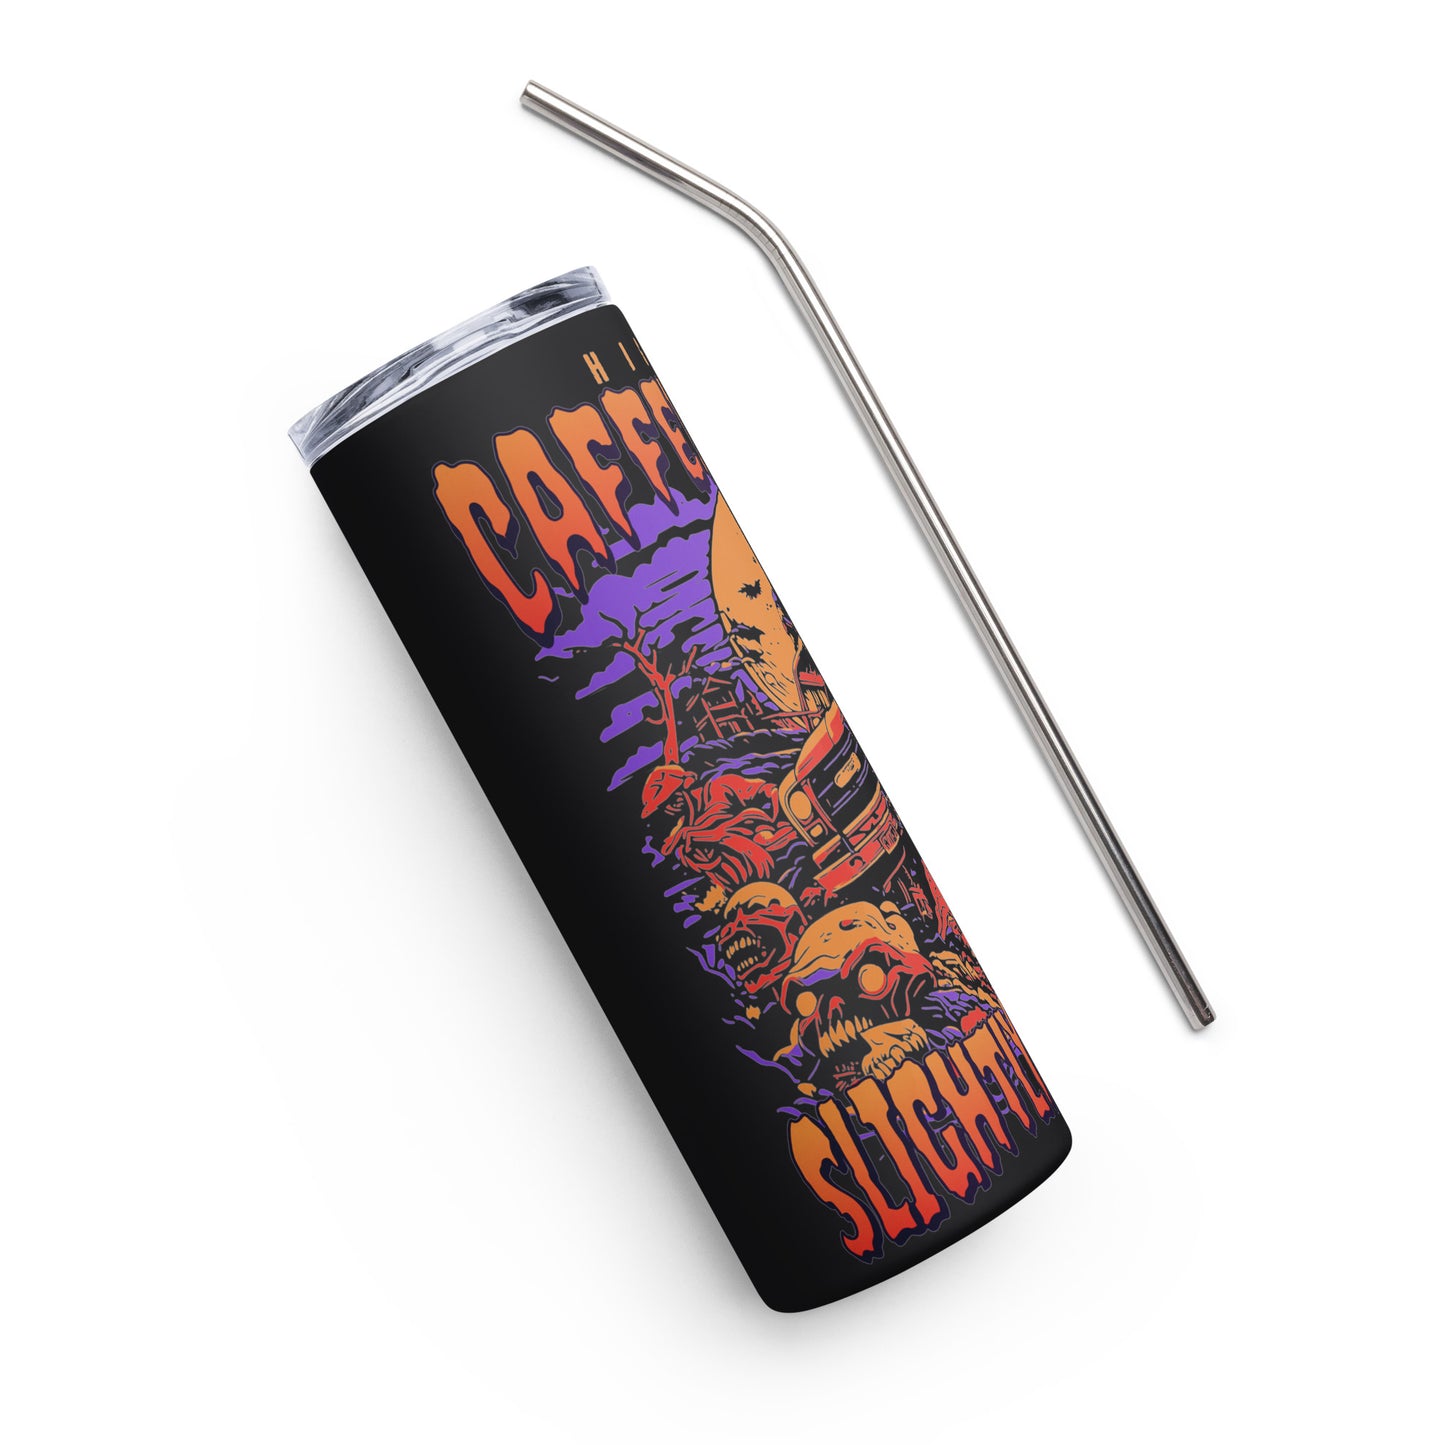 Highly Caffeinated Slightly Spooky Stainless steel tumbler